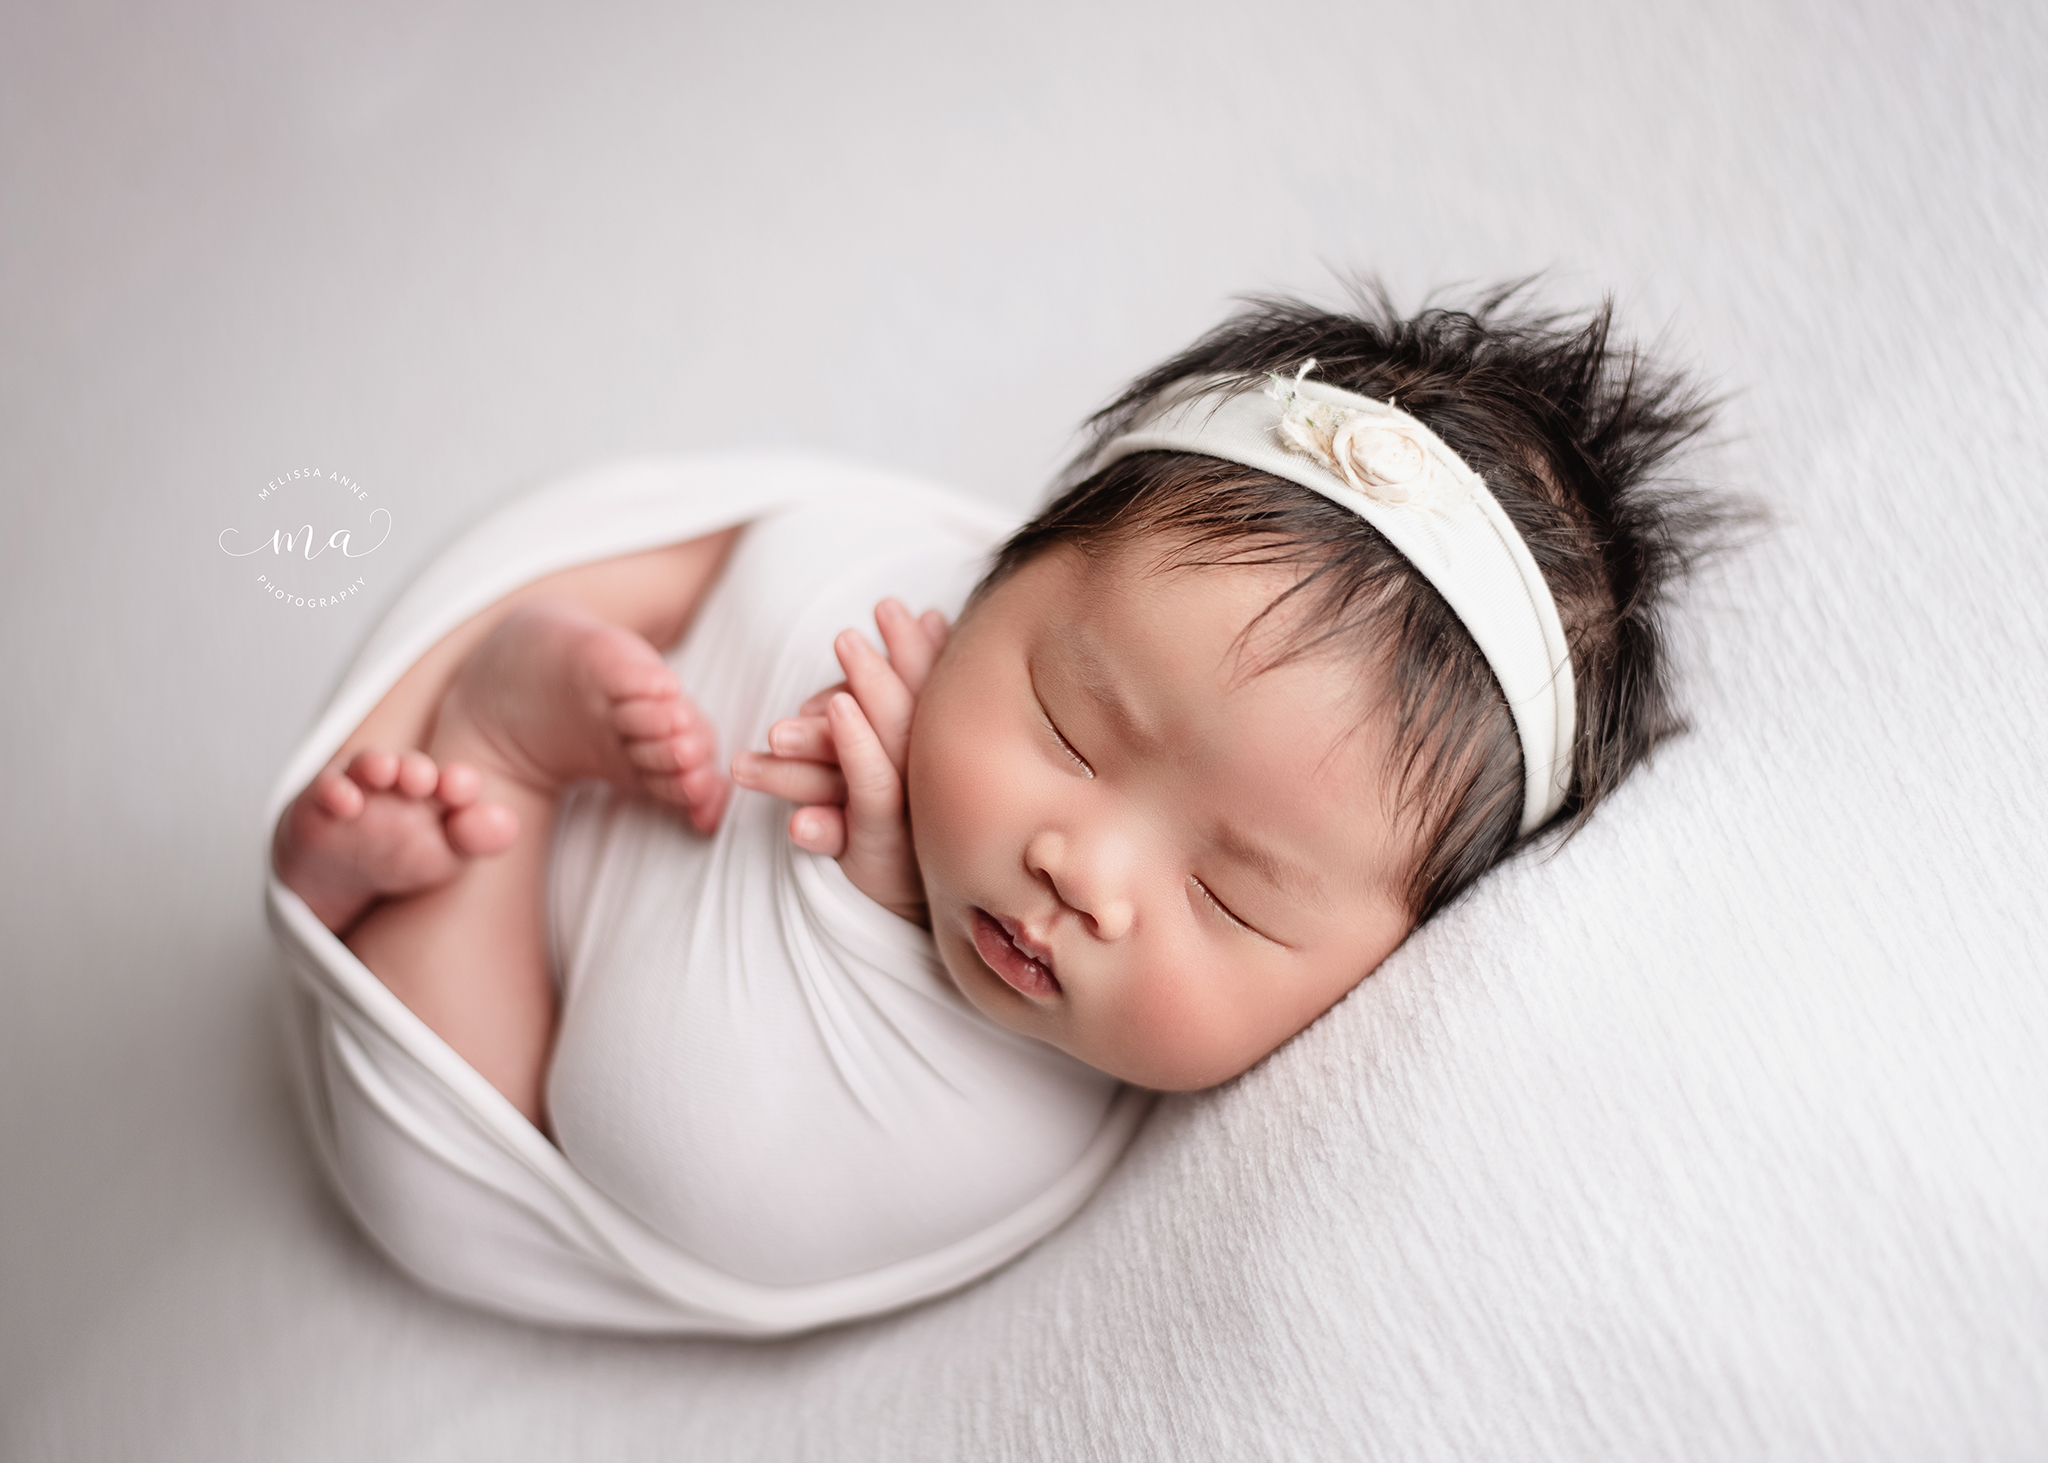 How to pose a 2 or 3 month old baby | Frisco newborn photographer